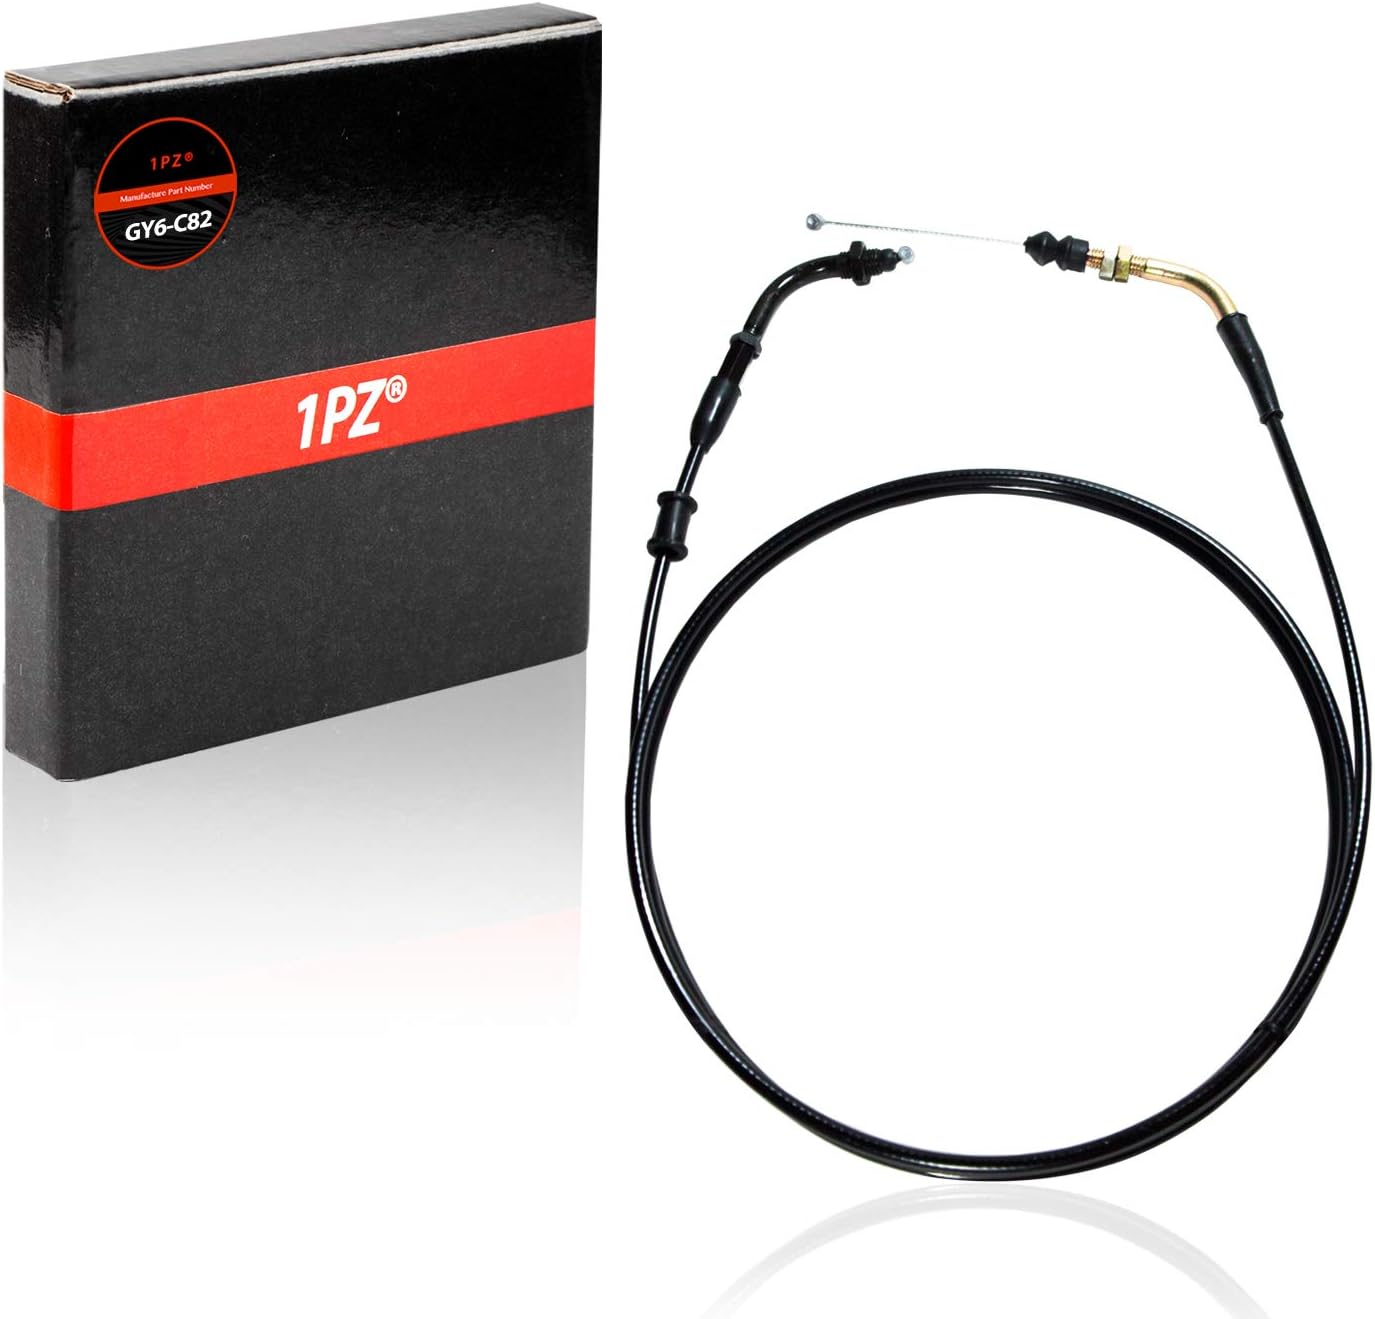 1PZ Universal 74" - 78" Throttle Cable for GY6 50cc 125cc 150cc 139QMB Scooter Motorcycle Moped ATV Baja TaoTao Jonway Lifan